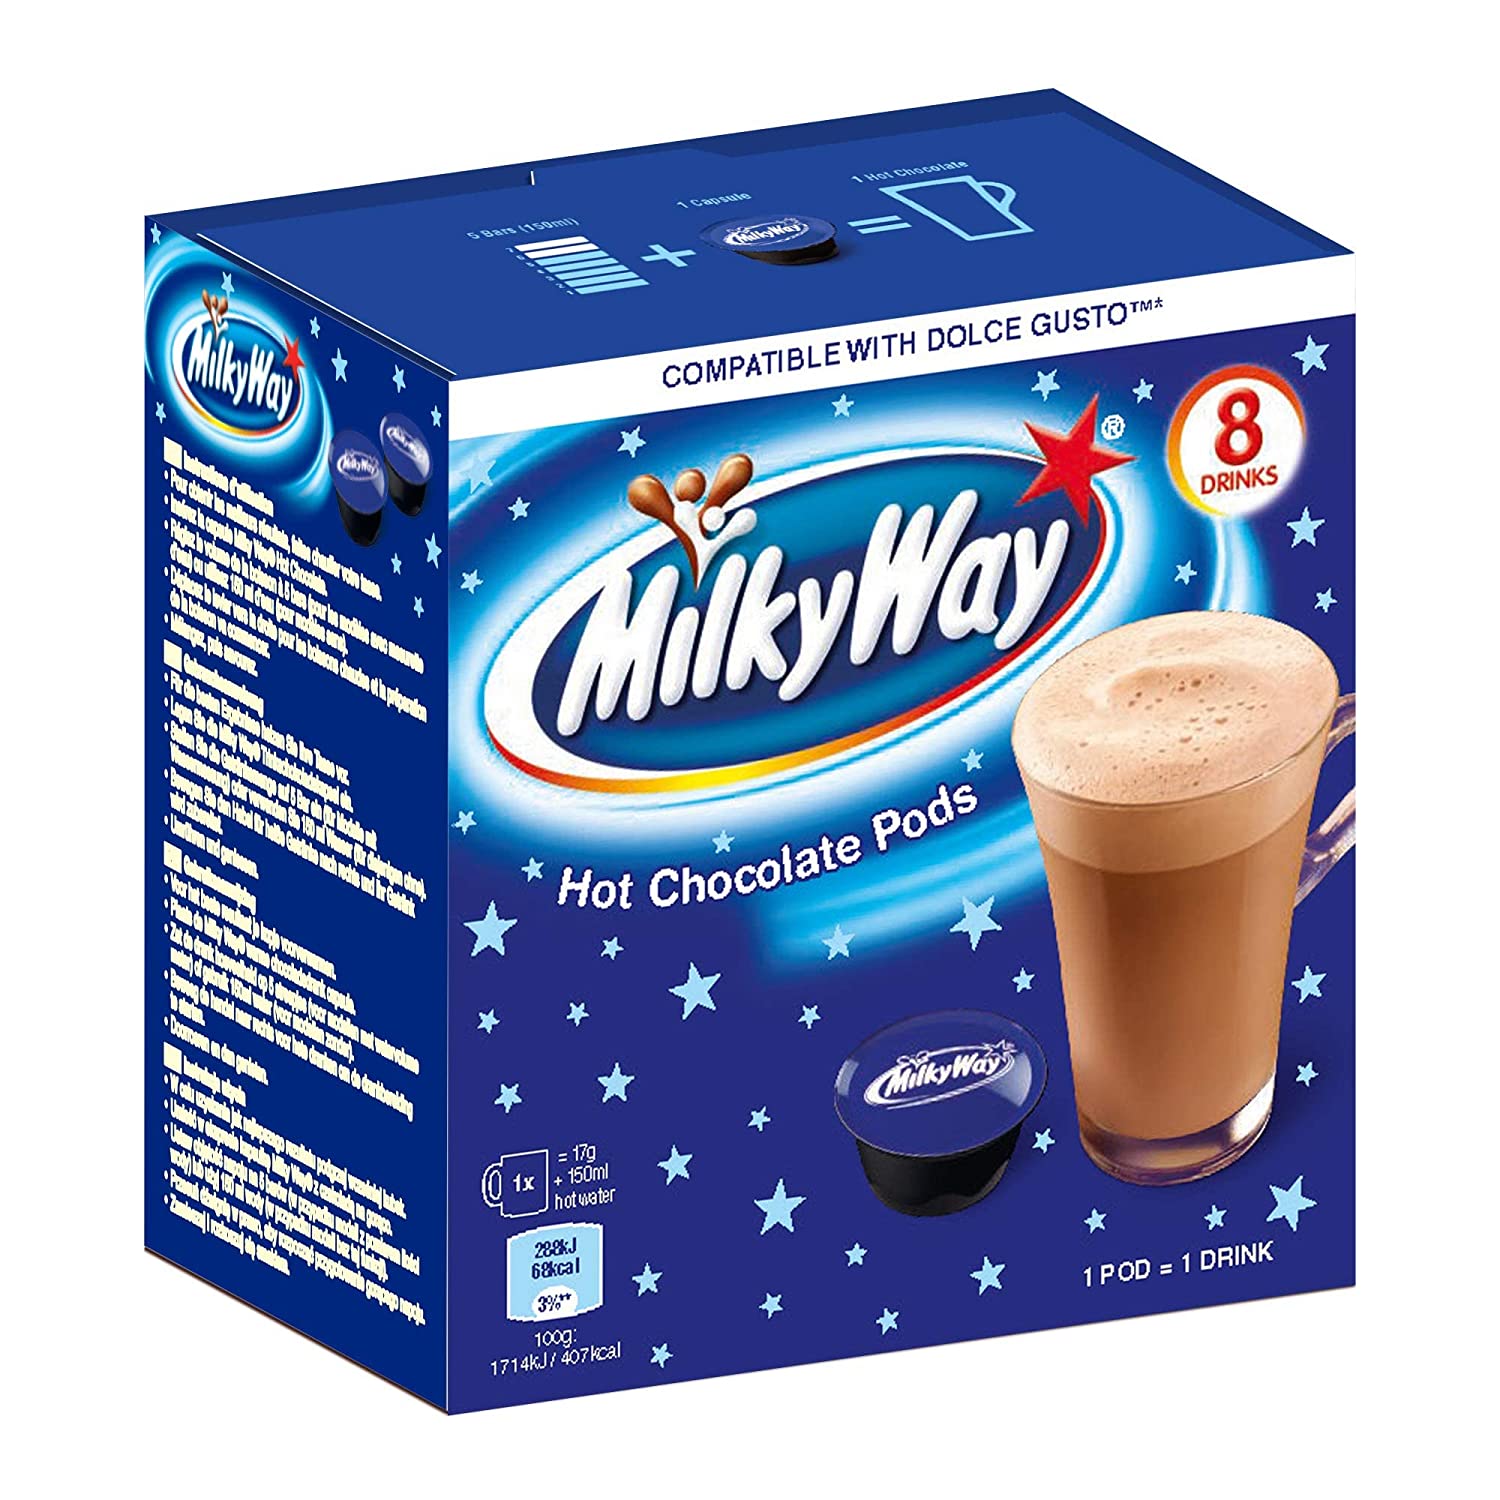 NESCAFE DOLCE GUSTO CAPSULES - HOT CHOCOLATE DRINK - TWIX - MILKY WAY - MARS